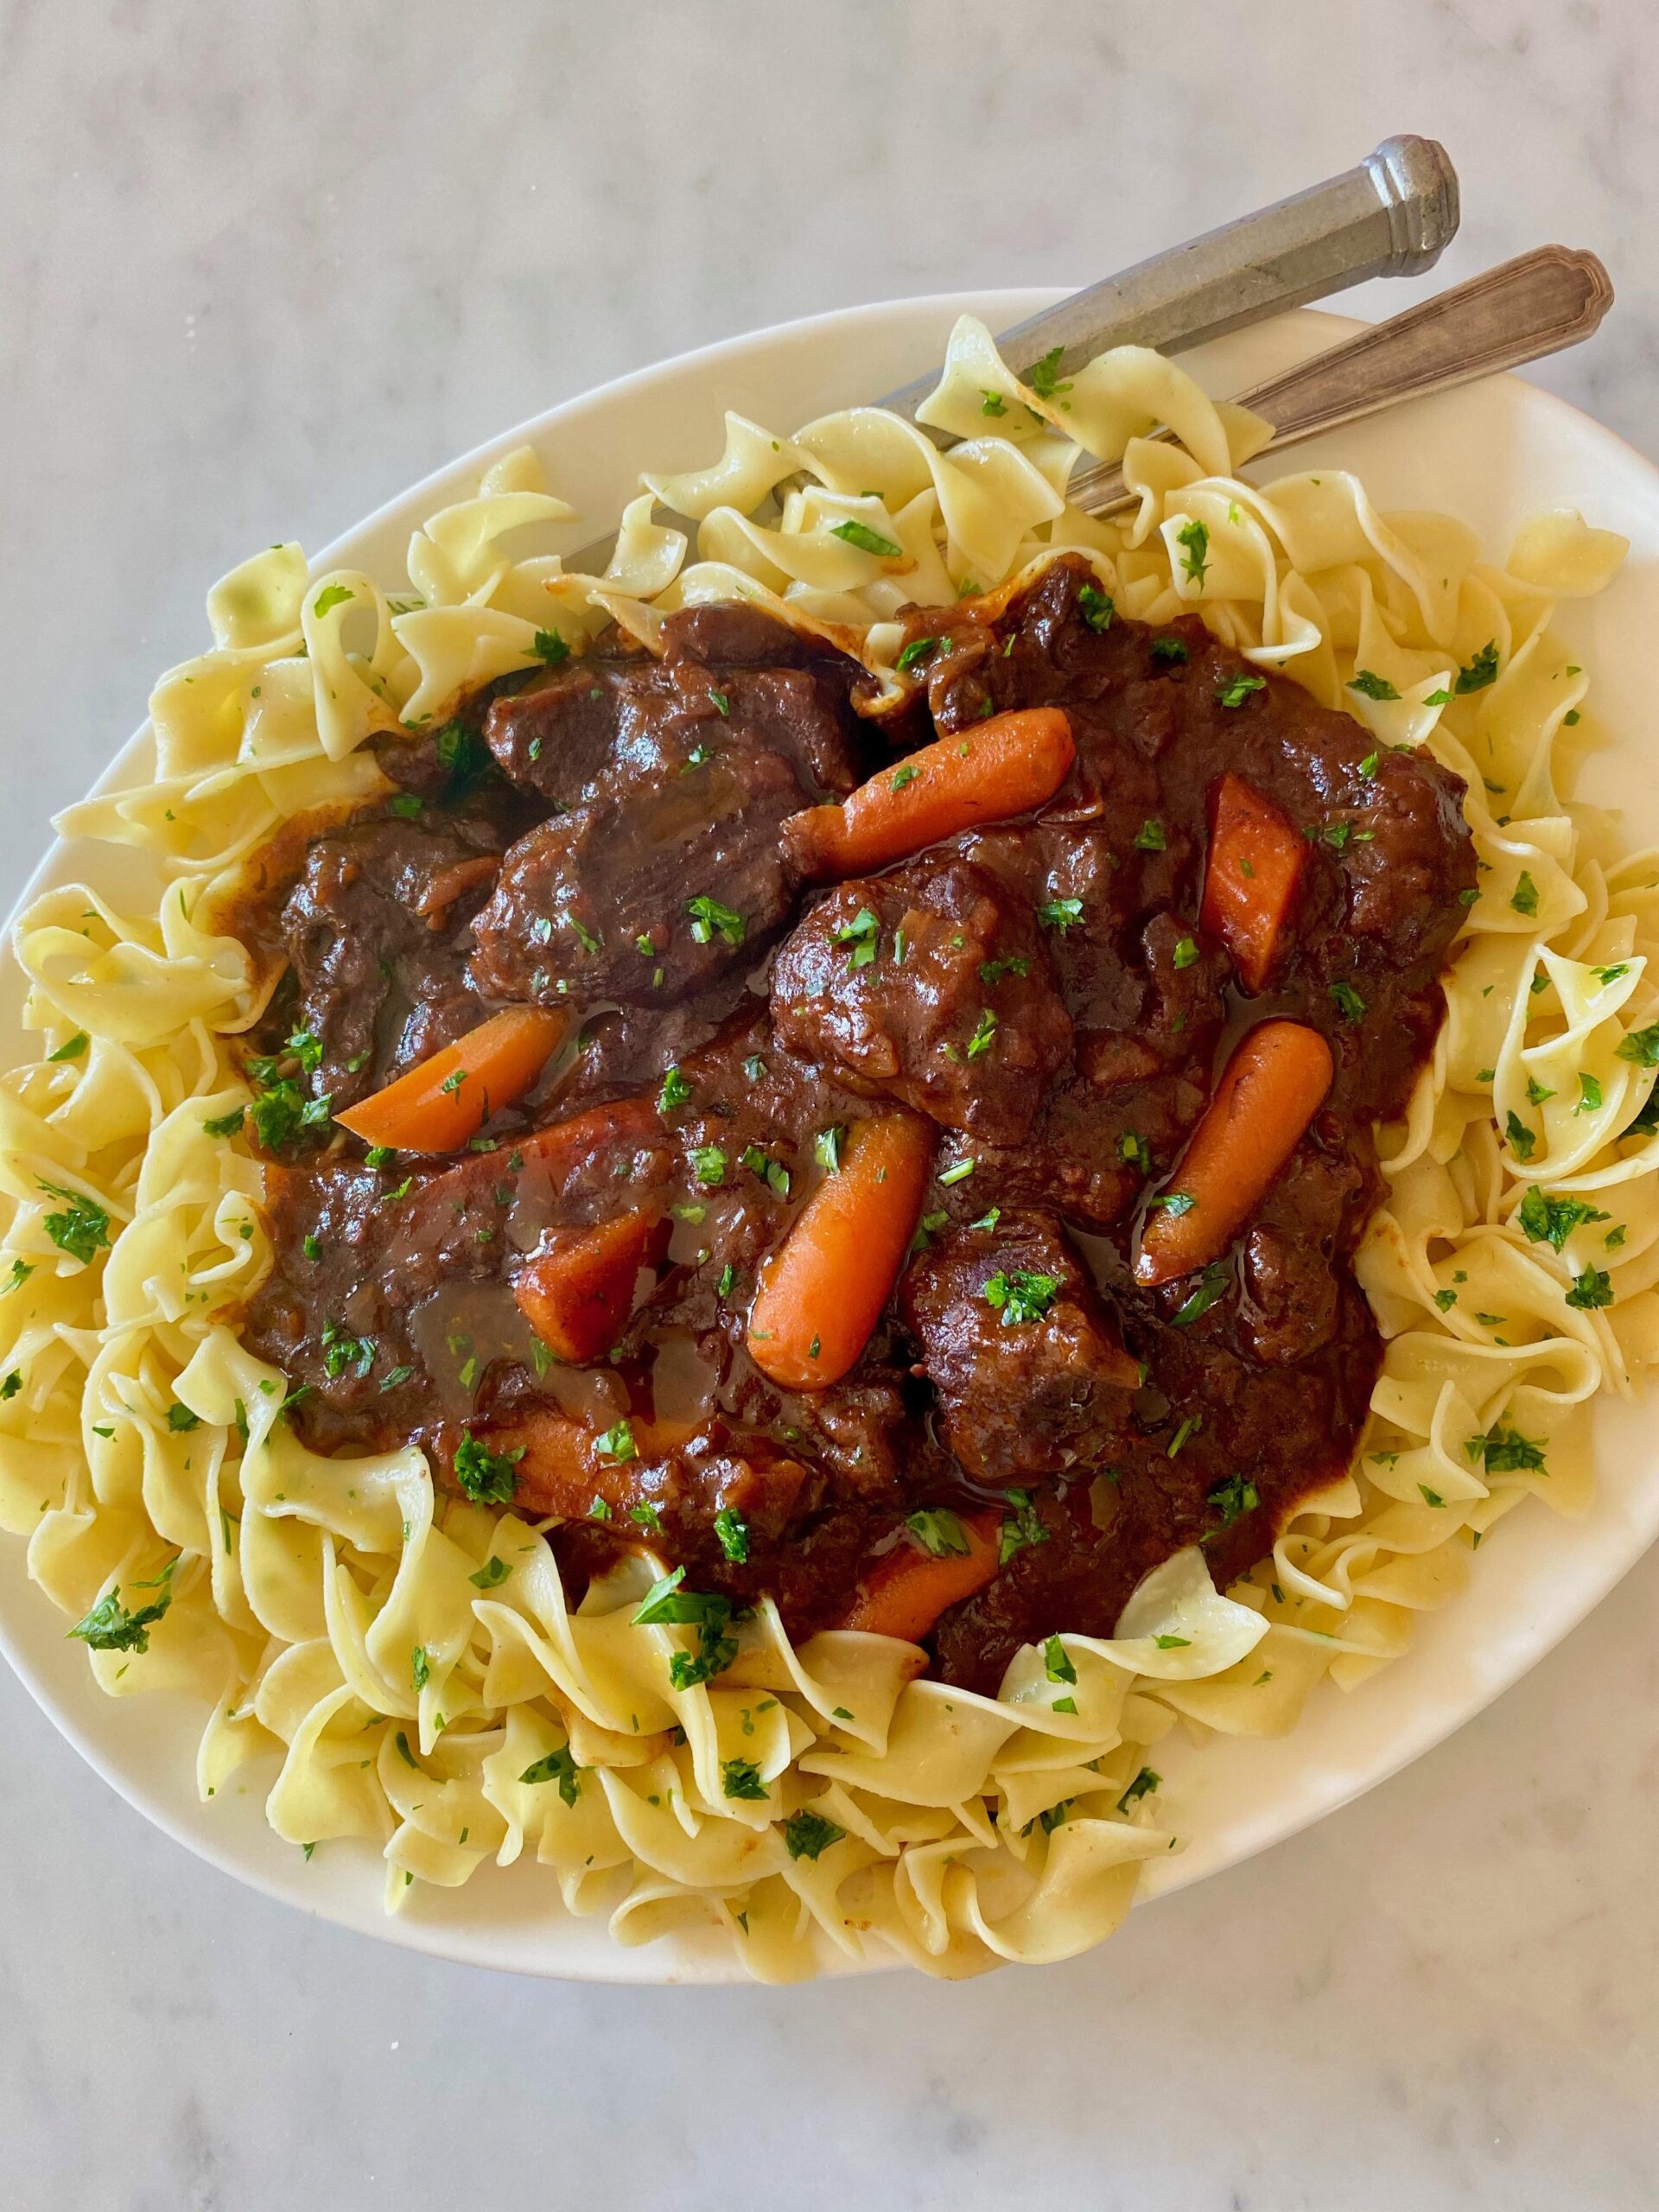  Savor the rich flavor of this Beef Stew With Red Wine and Hoisin Sauce.